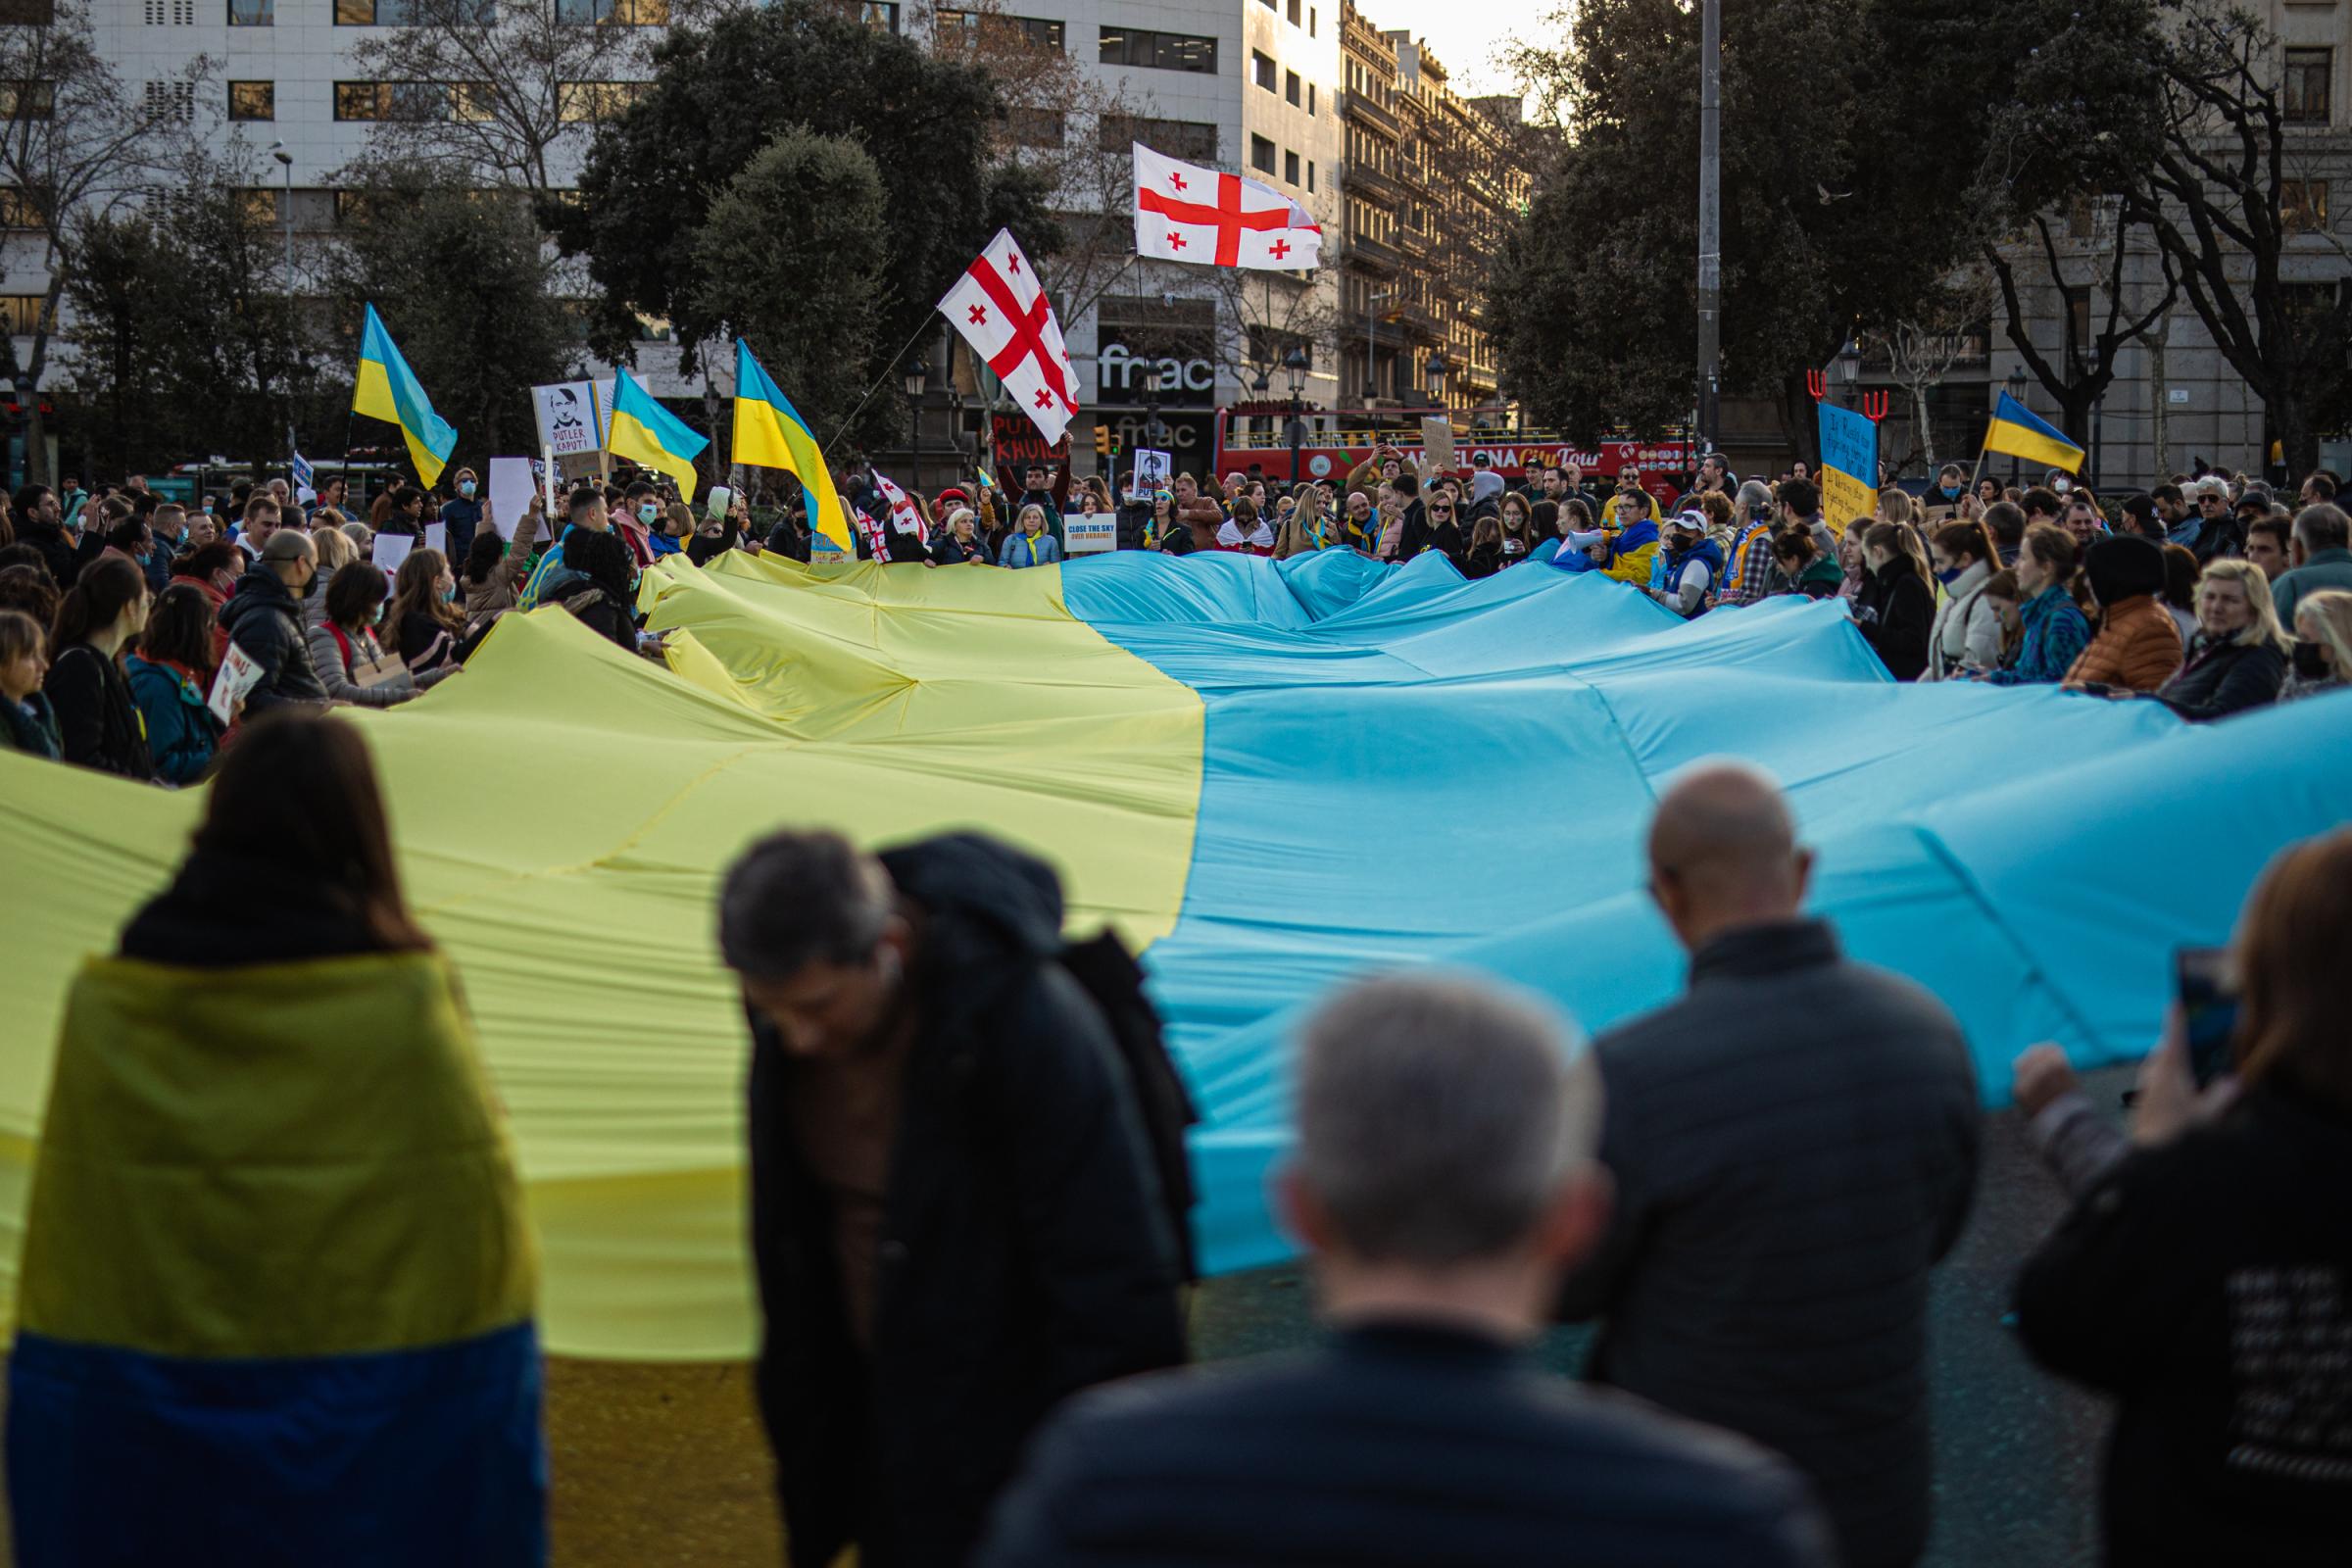 Protestors In Spain Rally For Ukraine After Russian Invasion - BARCELONA, SPAIN - FEBRUARY 27: People take part in a...